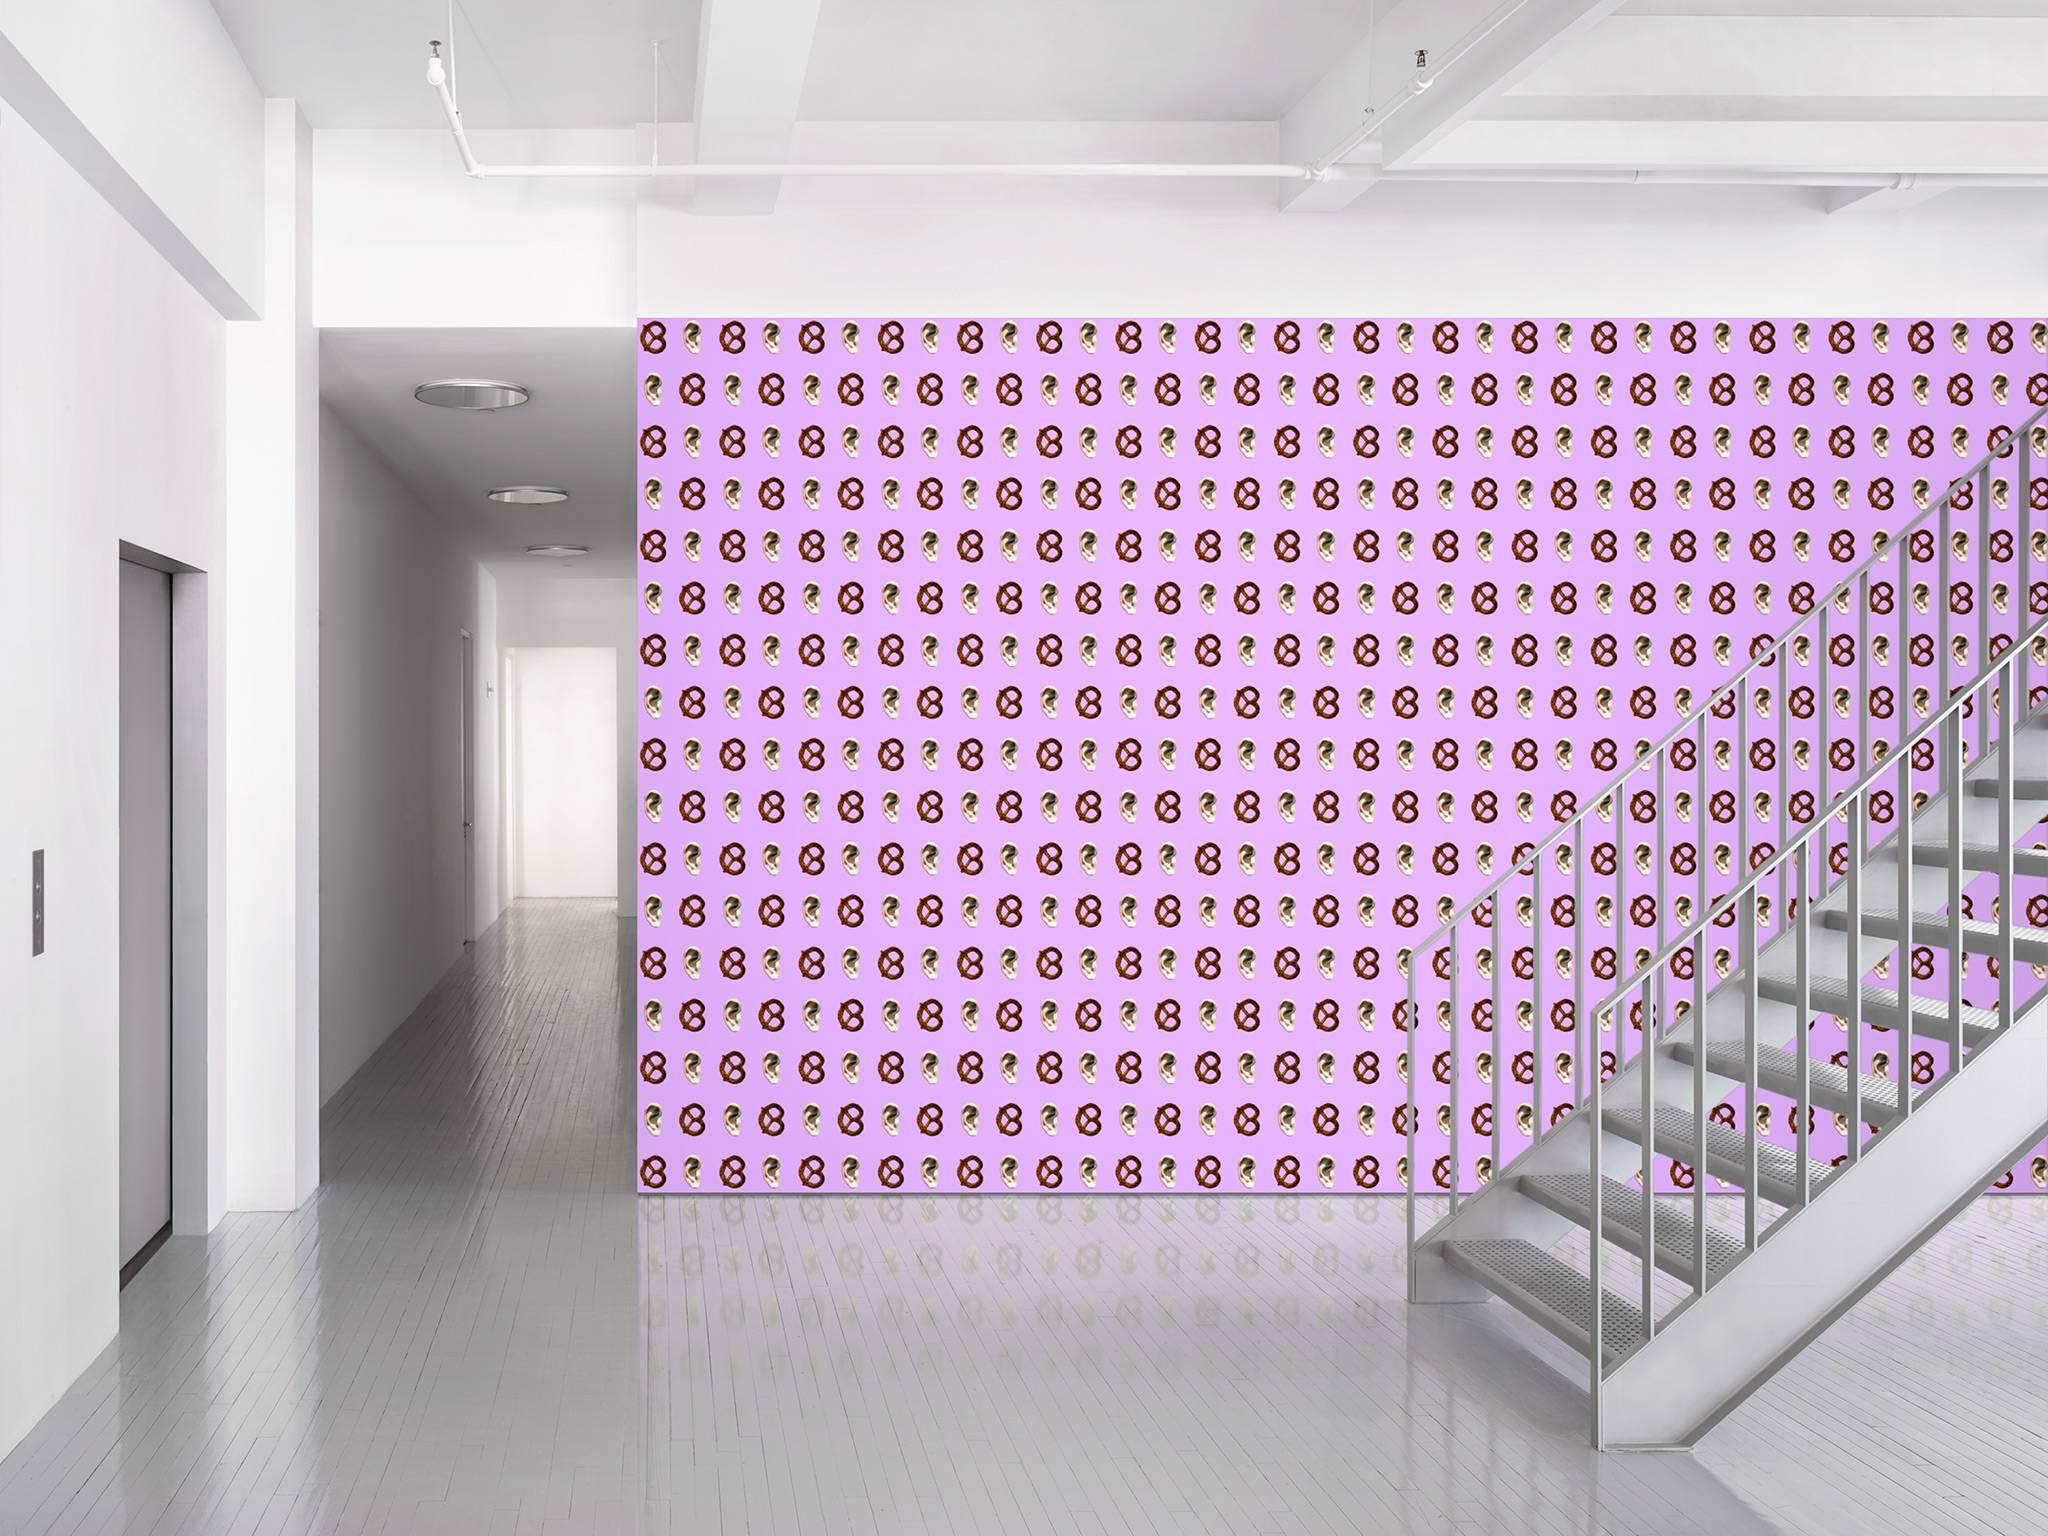 Maharam serpentine galleries wallpaper
Ear/Pretzel by John Baldessari
001

John Baldessari is a conceptual artist based in Santa Monica who uses text and appropriated imagery across painting, print, installation, and video. With deadpan humor,